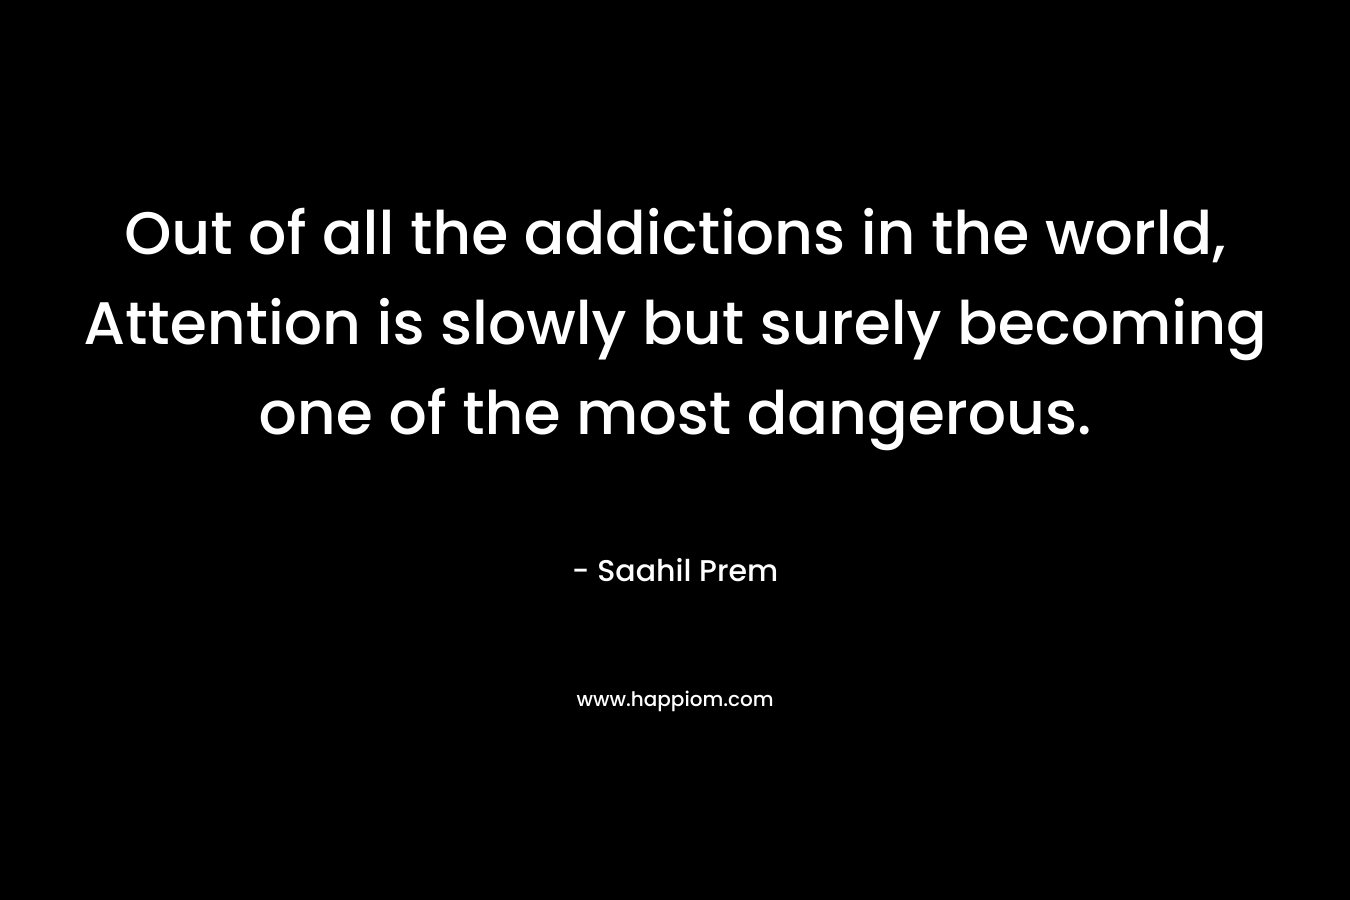 Out of all the addictions in the world, Attention is slowly but surely becoming one of the most dangerous.